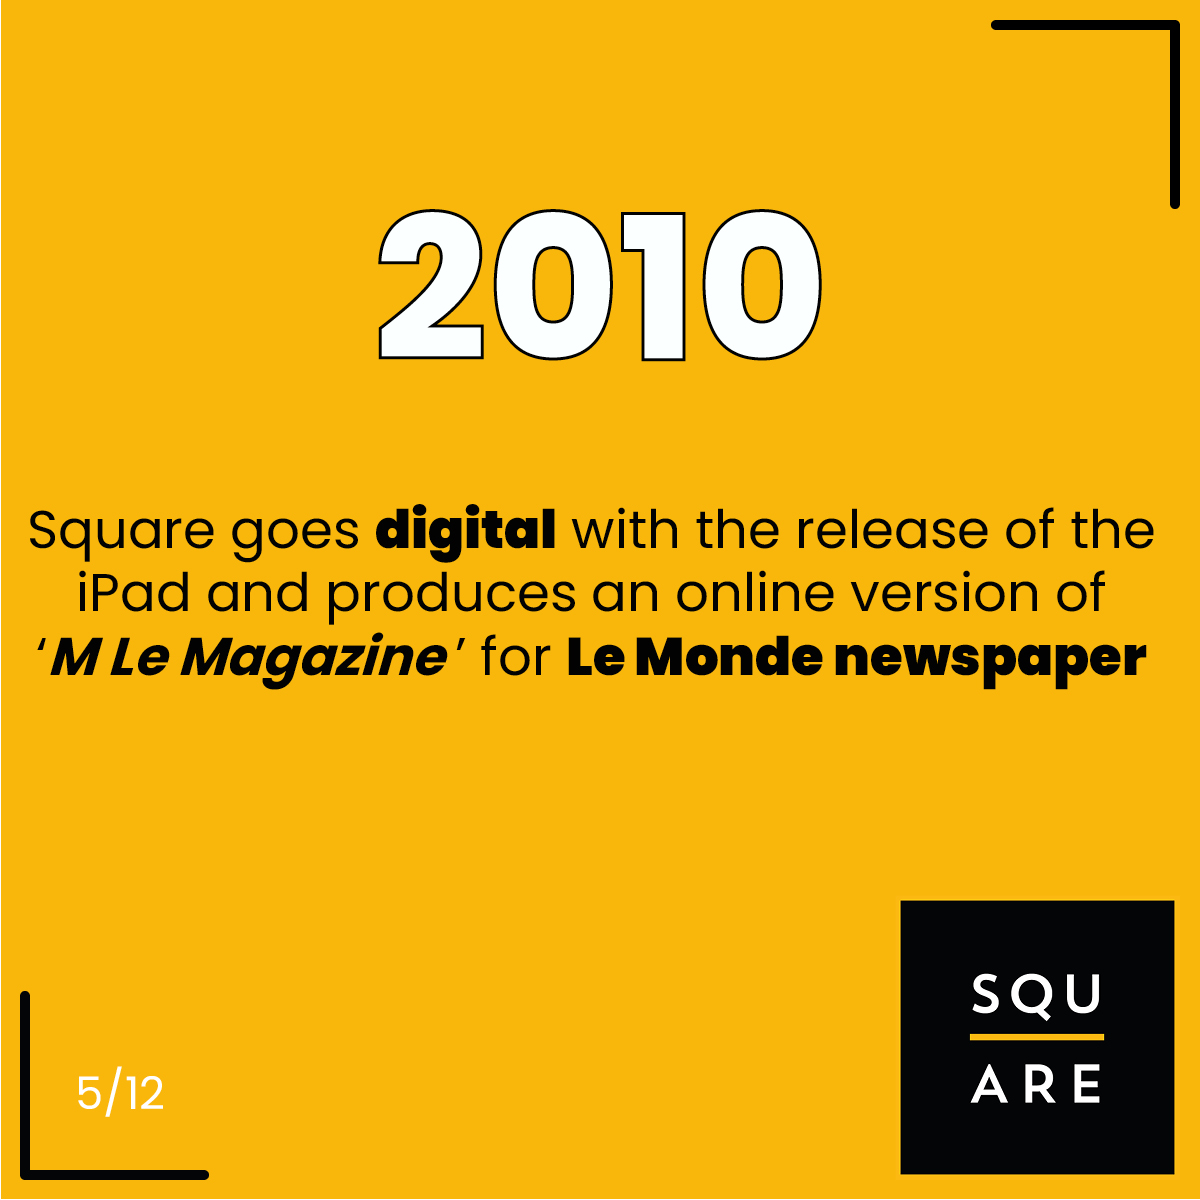 2010, Square goes digital with the release of the iPad and produces an online version of ‘M Le Magazine ’ for Le Monde newspaper